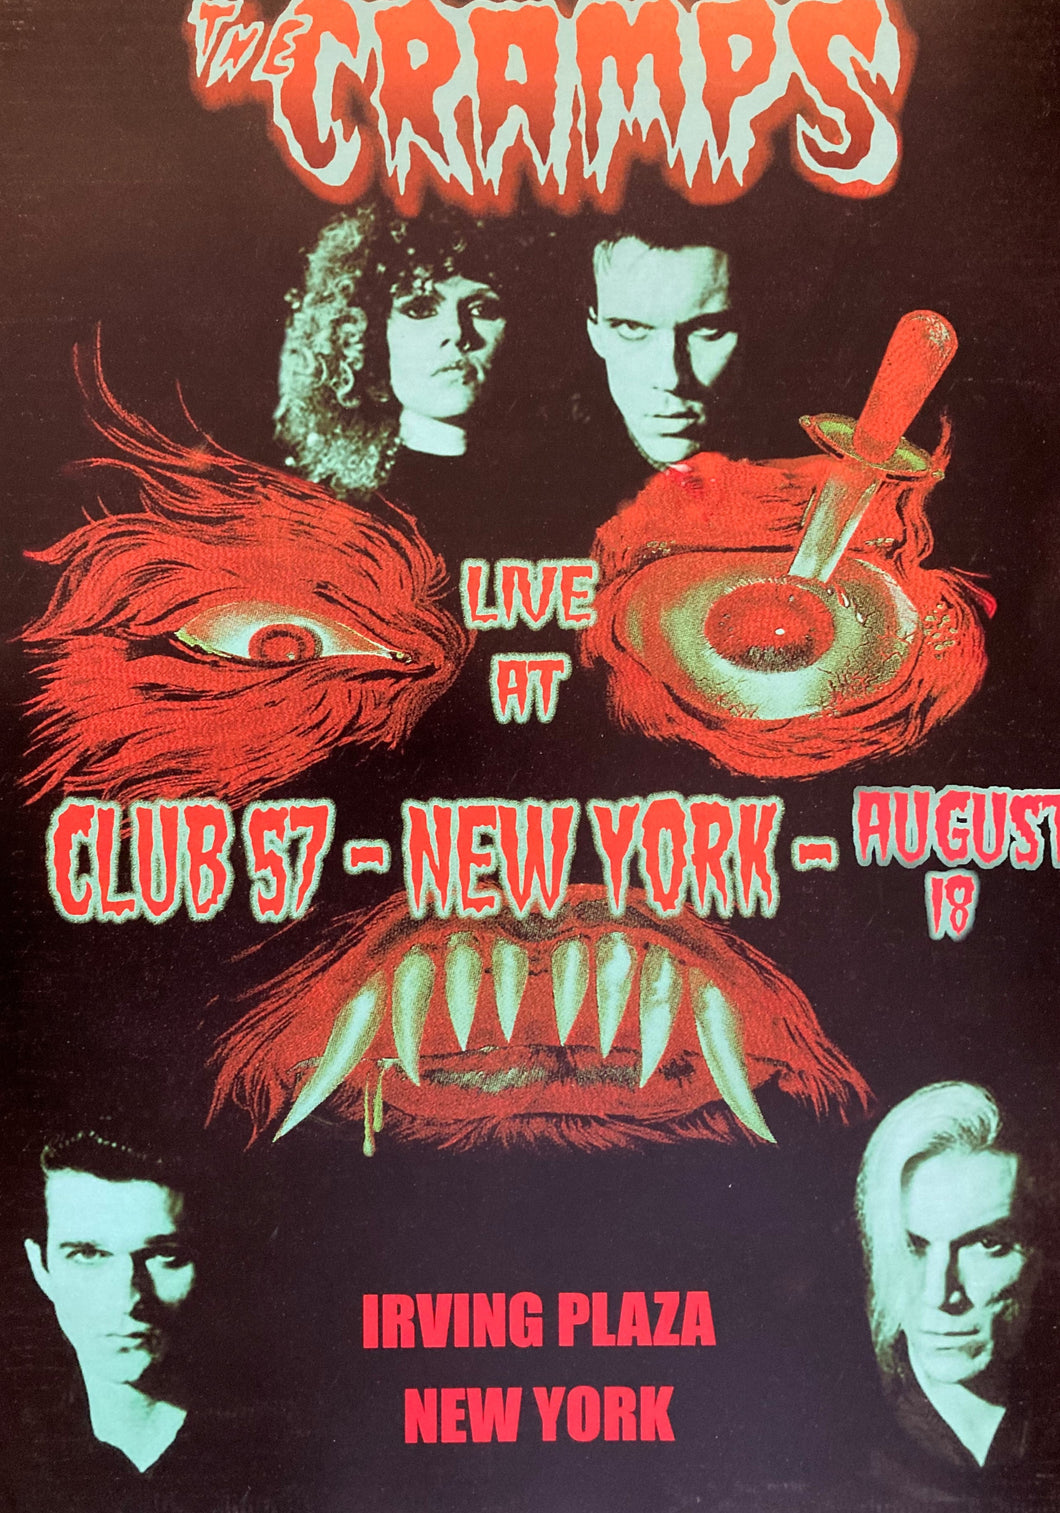 The Cramps poster - Live Club 57 New York USA 1979 Fantastic new reprint edition - Original Music and Movie Posters for sale from Bamalama - Online Poster Store UK London